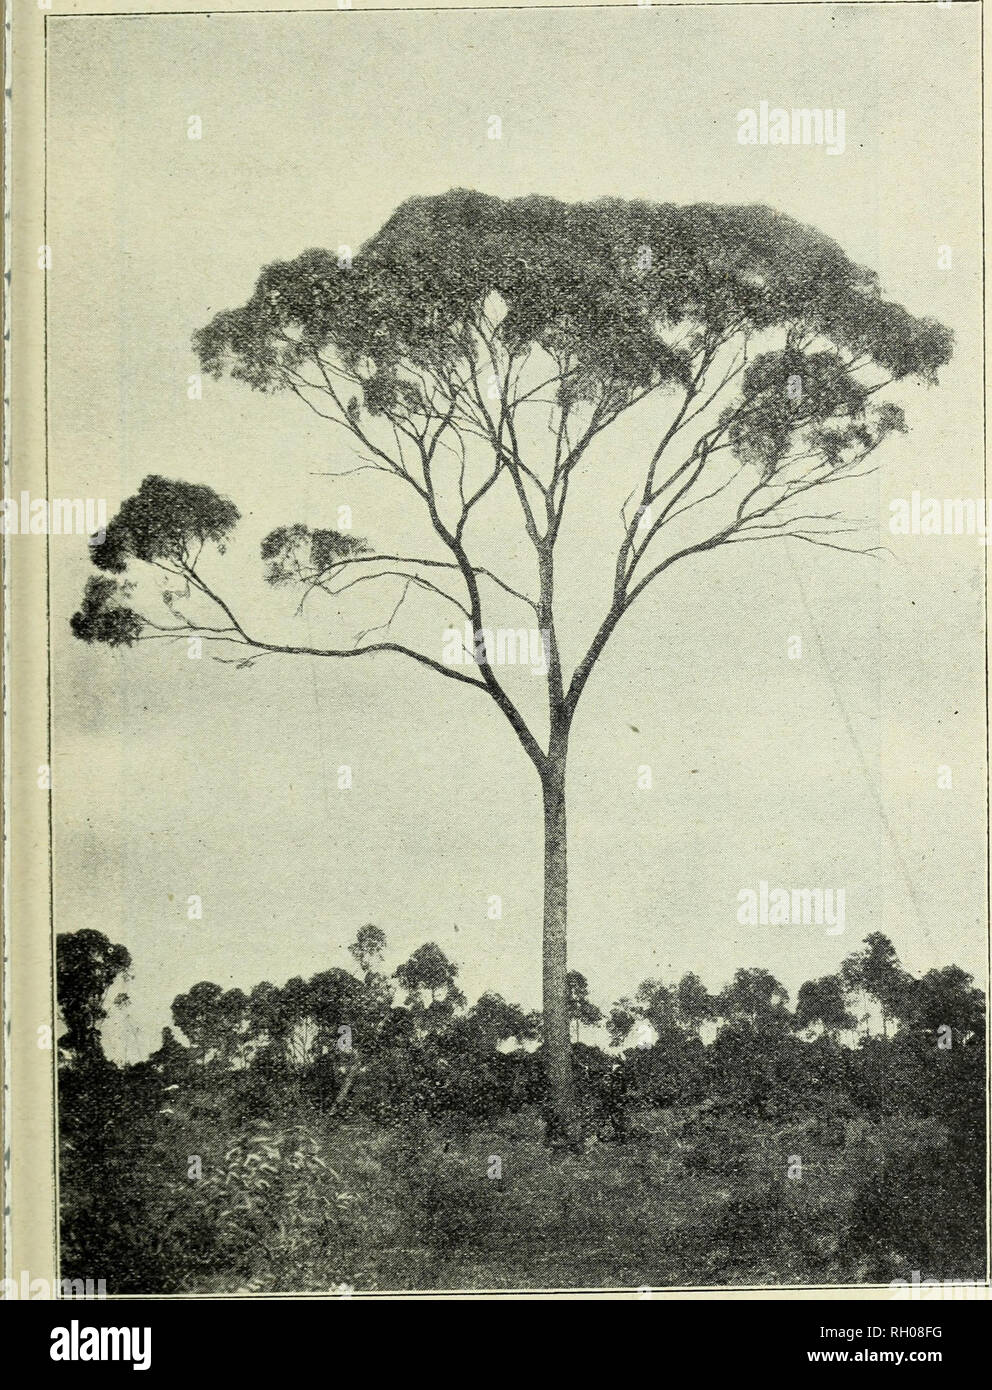 . Bulletin. Forests and forestry. and Industries of Western Australia* J23 â Morrell {Euc. longicornis, and E. oleosa).âThese trees, very 'similar in habit, attain about 50ft. in height, and have widely spreading branches. The bark is grey, rough, and persistent on the trunk and part. Morrell {Euc. oleosa). of the branches, the upper parts having a smooth greenish-brown bark ; the leaves are small and shining. The timber is very strong, but the trees do not here attain the size that they do in the Avon District.. Please note that these images are extracted from scanned page images that may hav Stock Photo